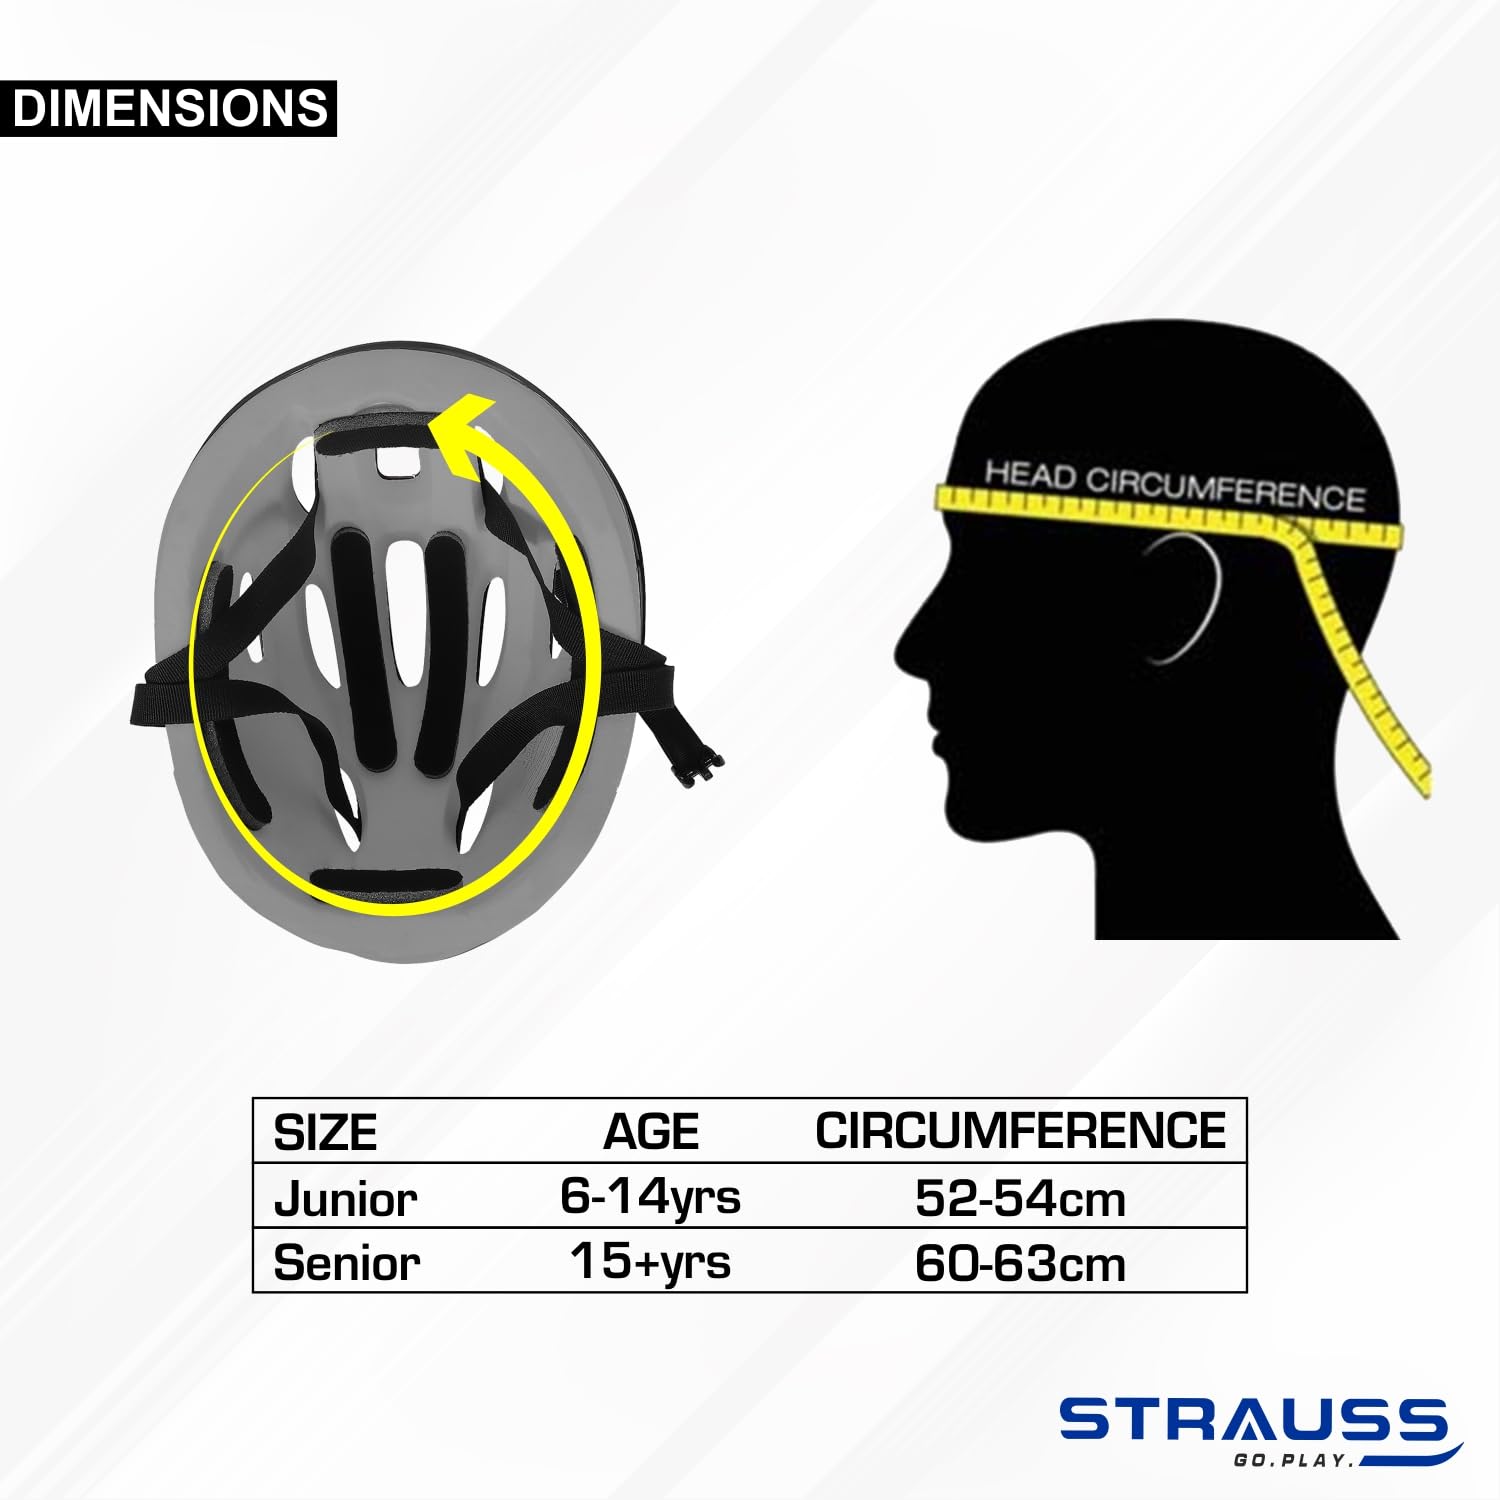 Strauss Cycling Helmet, Elite | Light Weight with Superior Ventilation | Mountain, Road Bike & Skating Helmet with Premium EPS Foam Lining| Ideal for Adults and Kids | Size: Senior,(Black and Red)